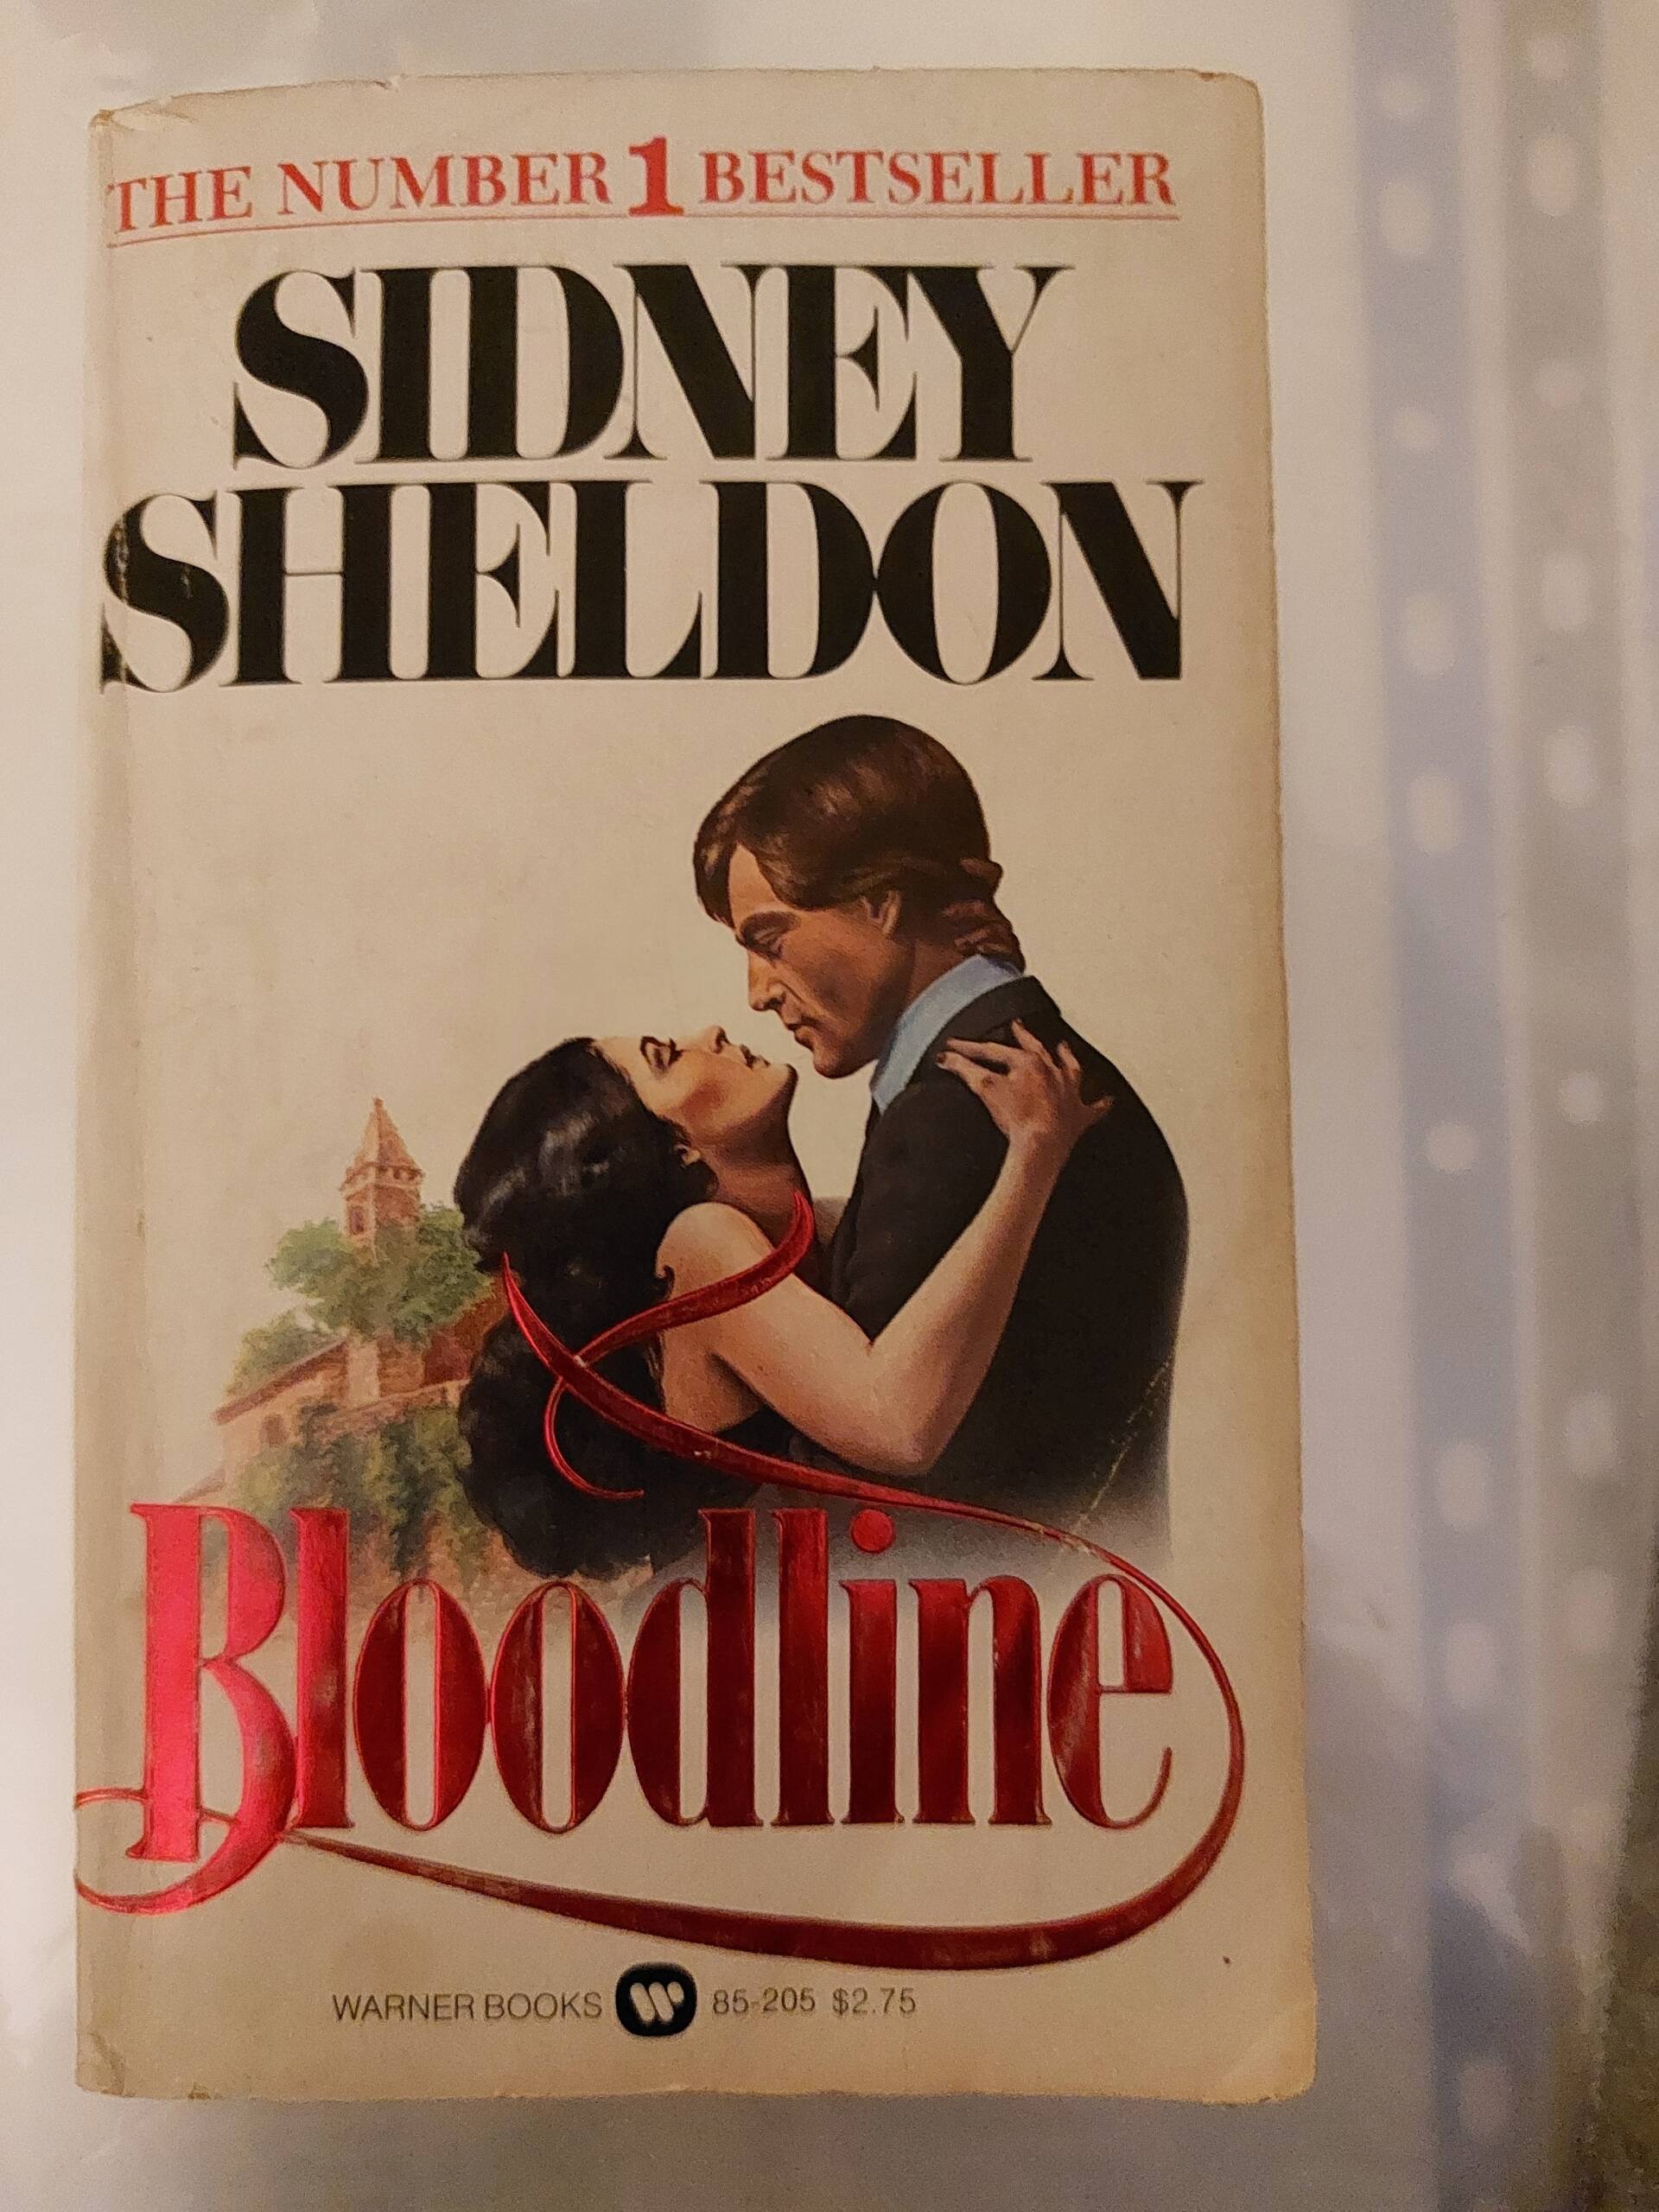 Book Review: "Bloodline" by Sidney Sheldon